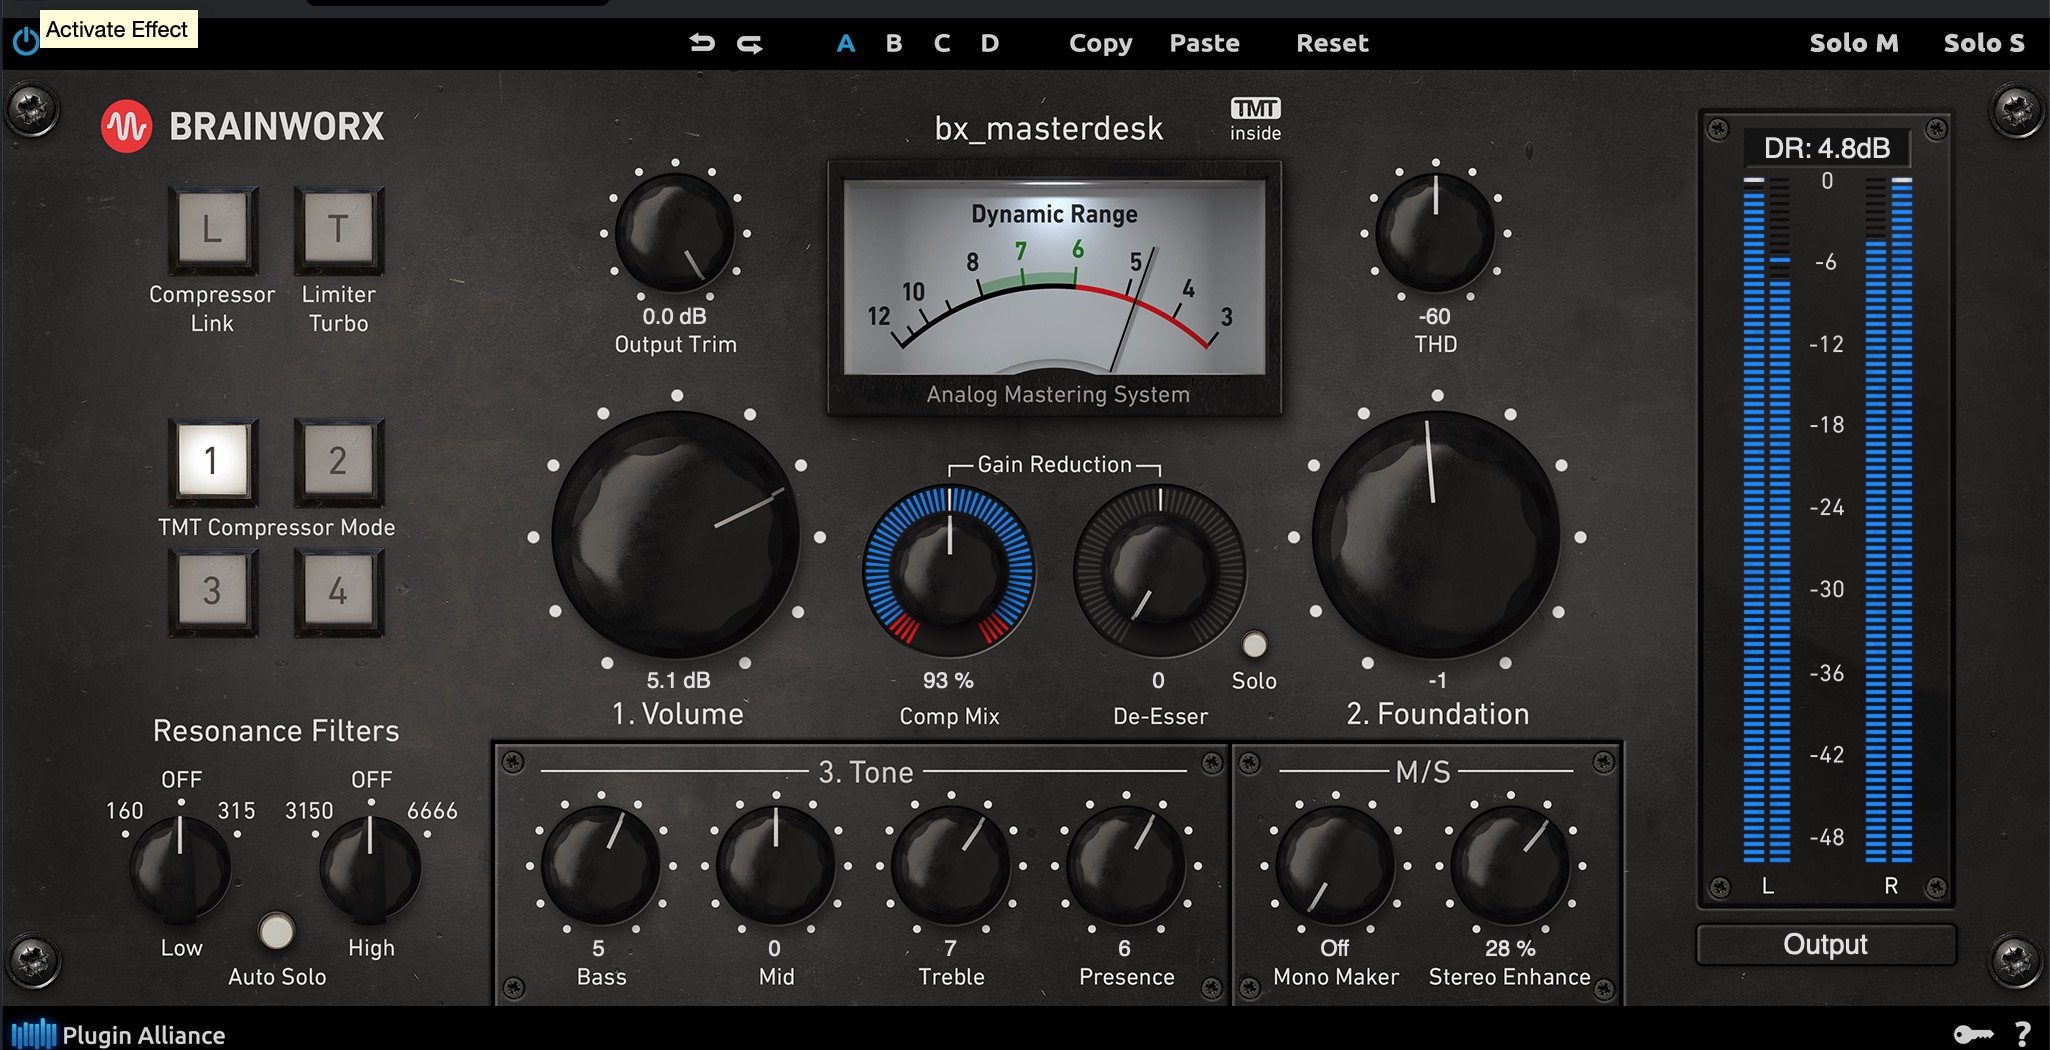 bx_masterdesk Review – Mastering for All and Complete Mastering Chain by Brainworx